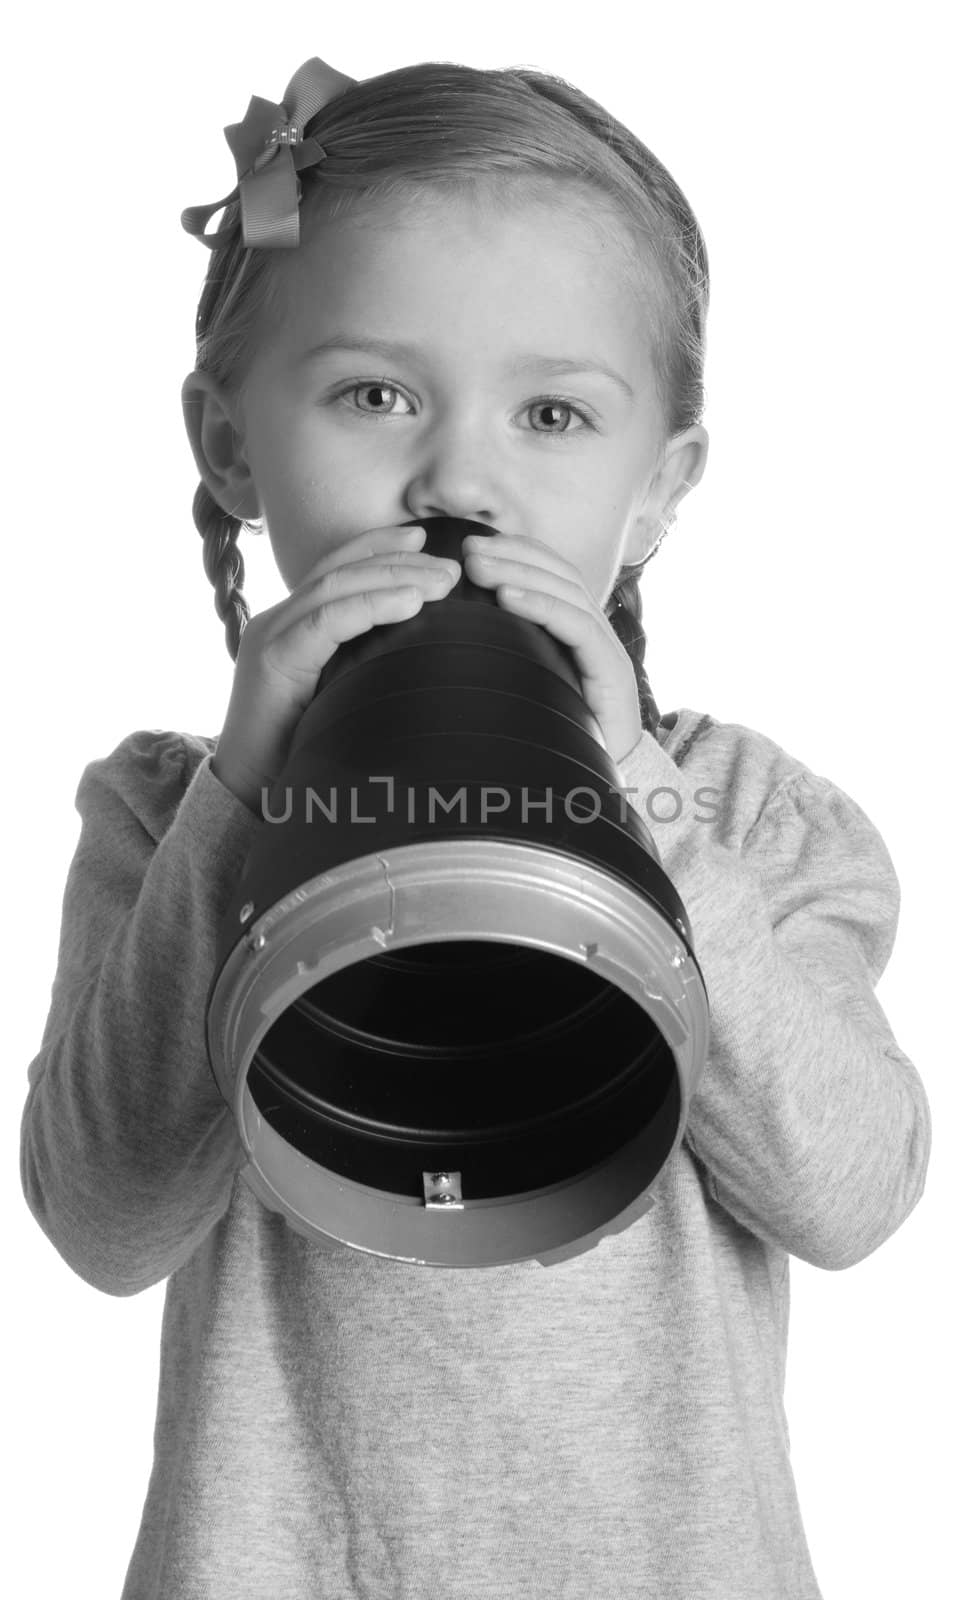 A very beautiful young child is announcing through a metal cone.  The photograph is done in black and white to lighten the mood of the photograph.